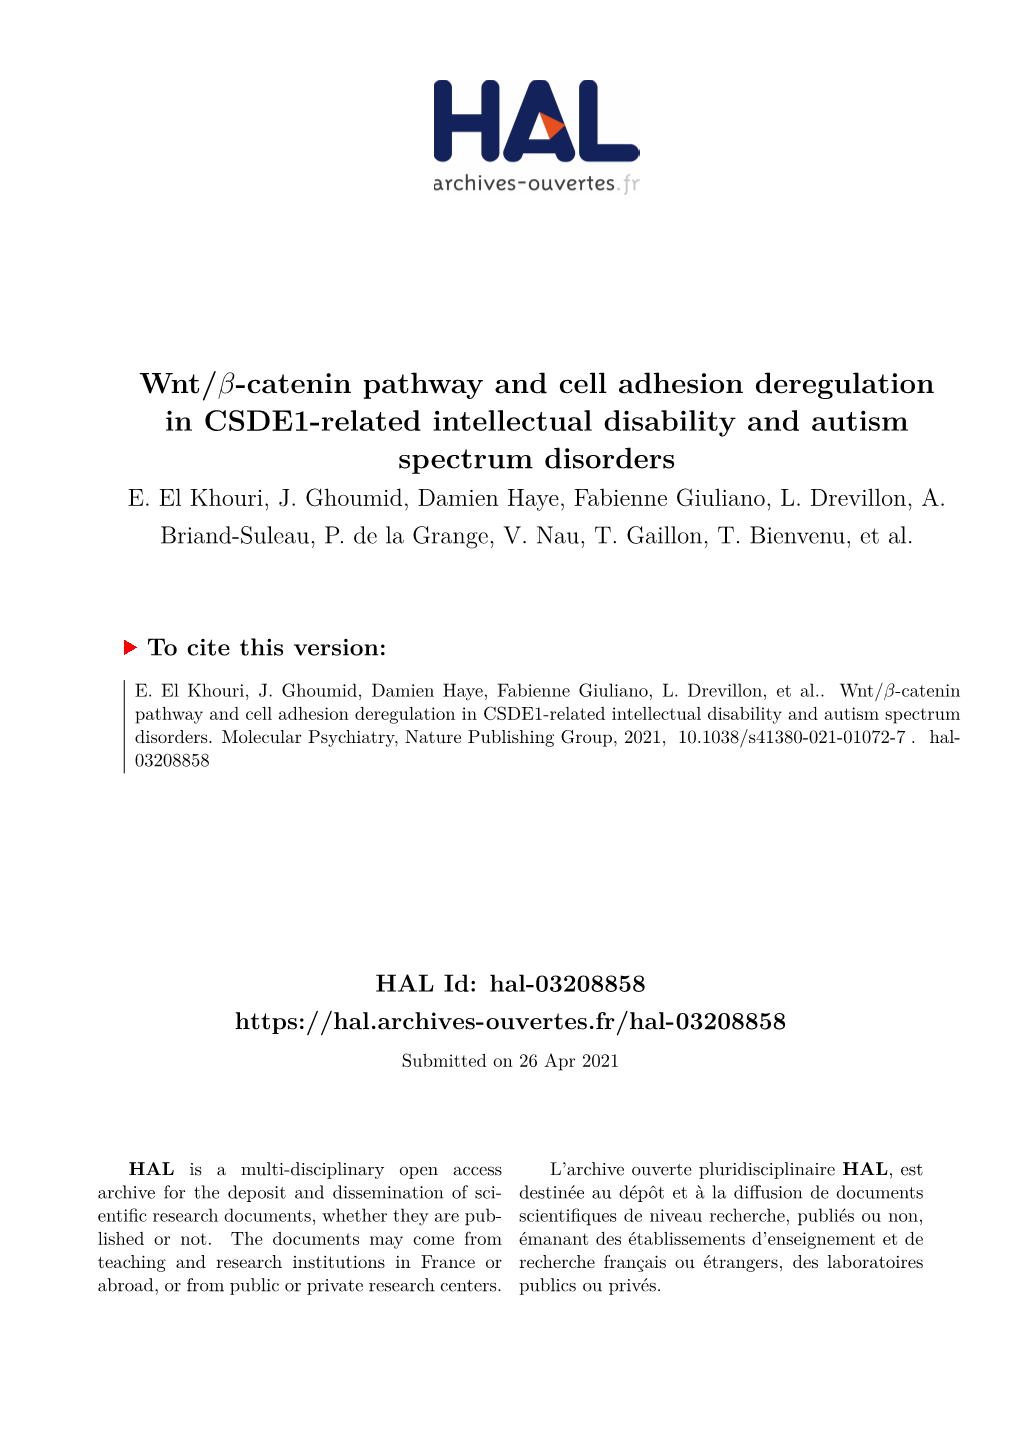 Catenin Pathway and Cell Adhesion Deregulation in CSDE1-Related Intellectual Disability and Autism Spectrum Disorders E